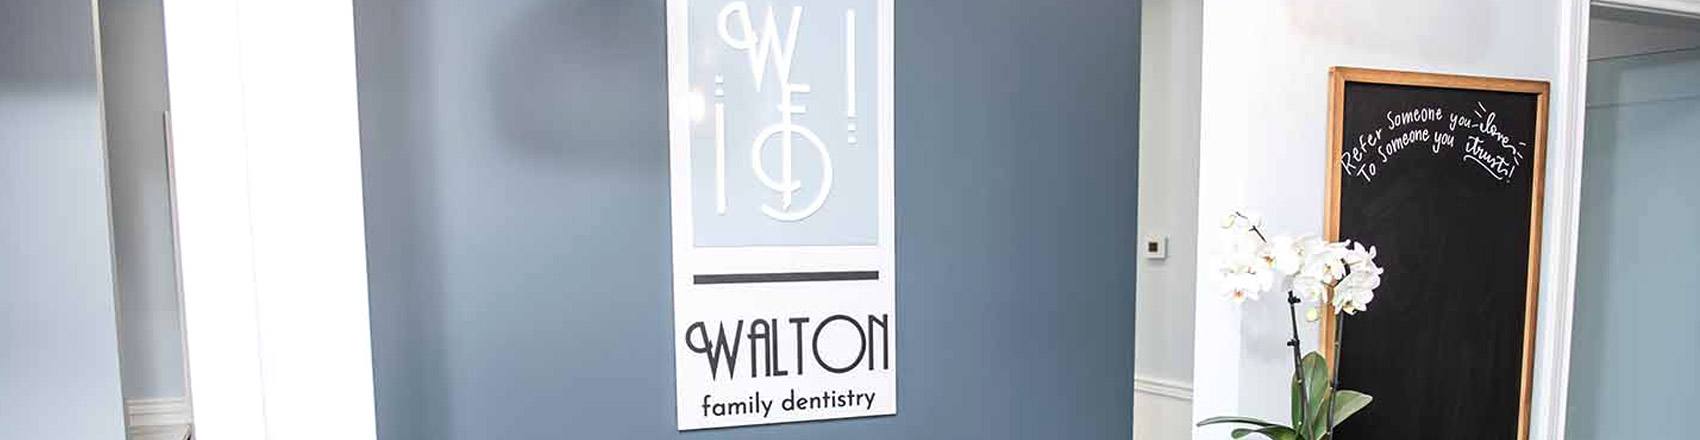 Our Office - Walton Family Dentistry